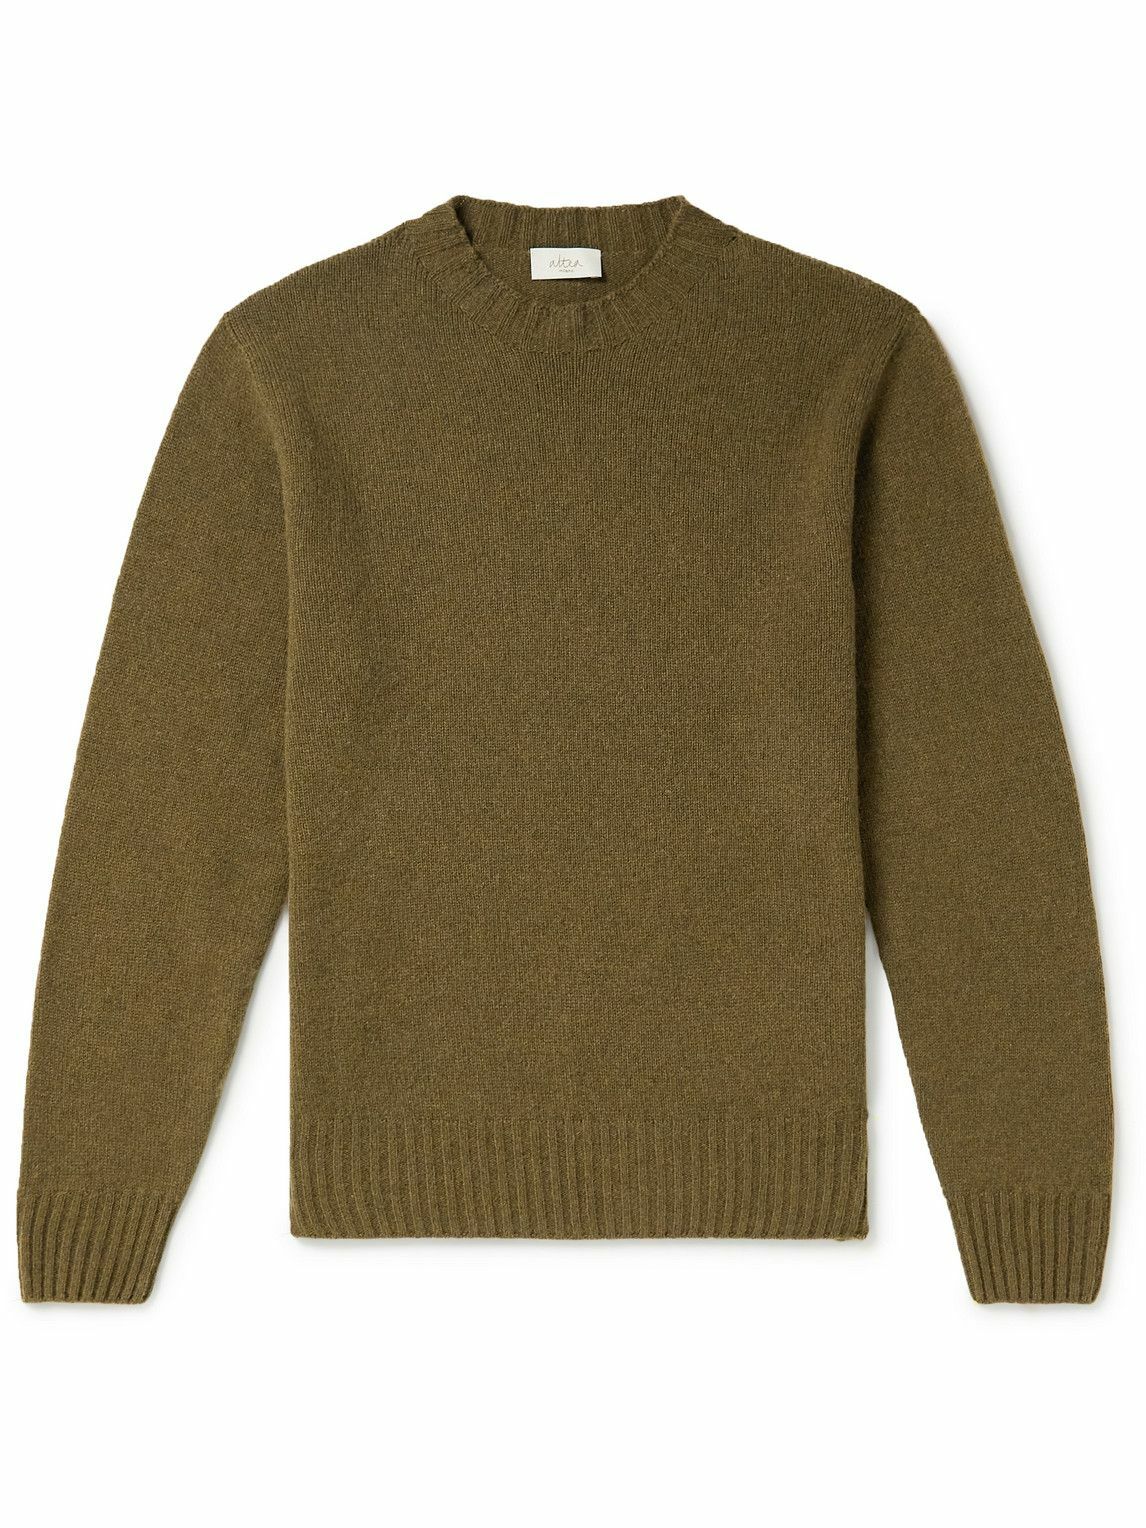 Altea - Cashmere, Mohair and Wool-Blend Sweater - Brown Altea